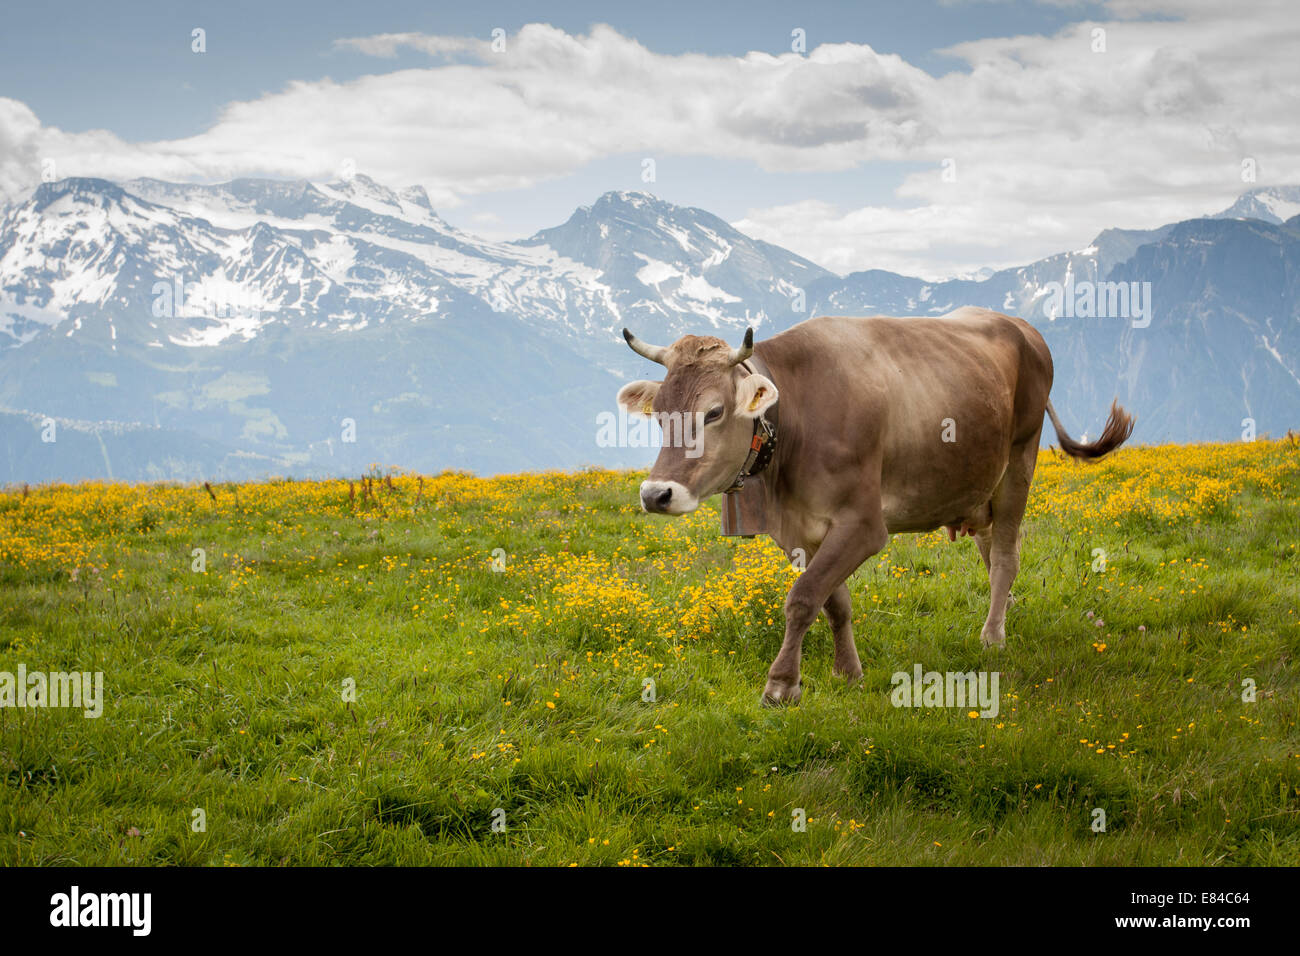 Cow walking in the Alps Stock Photo